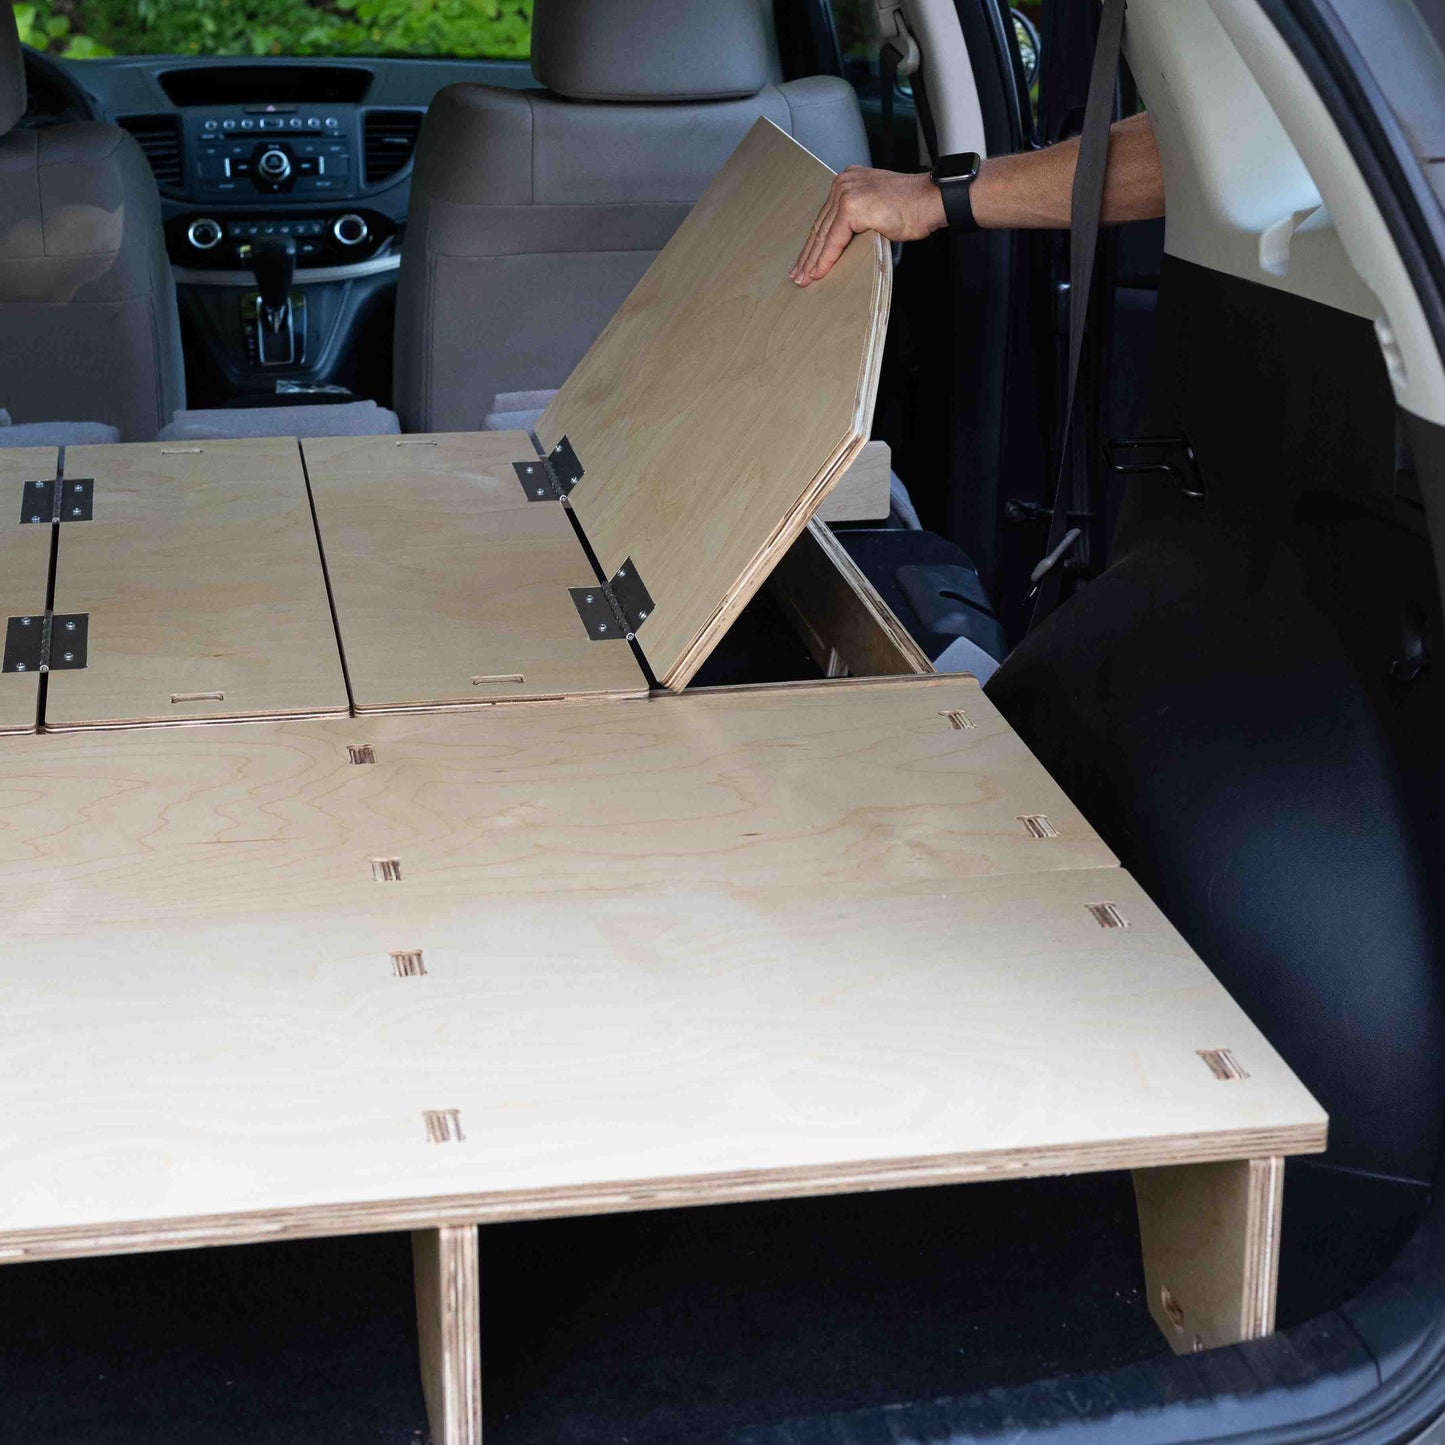 A person utilizing the storage space in a Honda CR-V to assemble a CarToCamp Sleeping Platform.